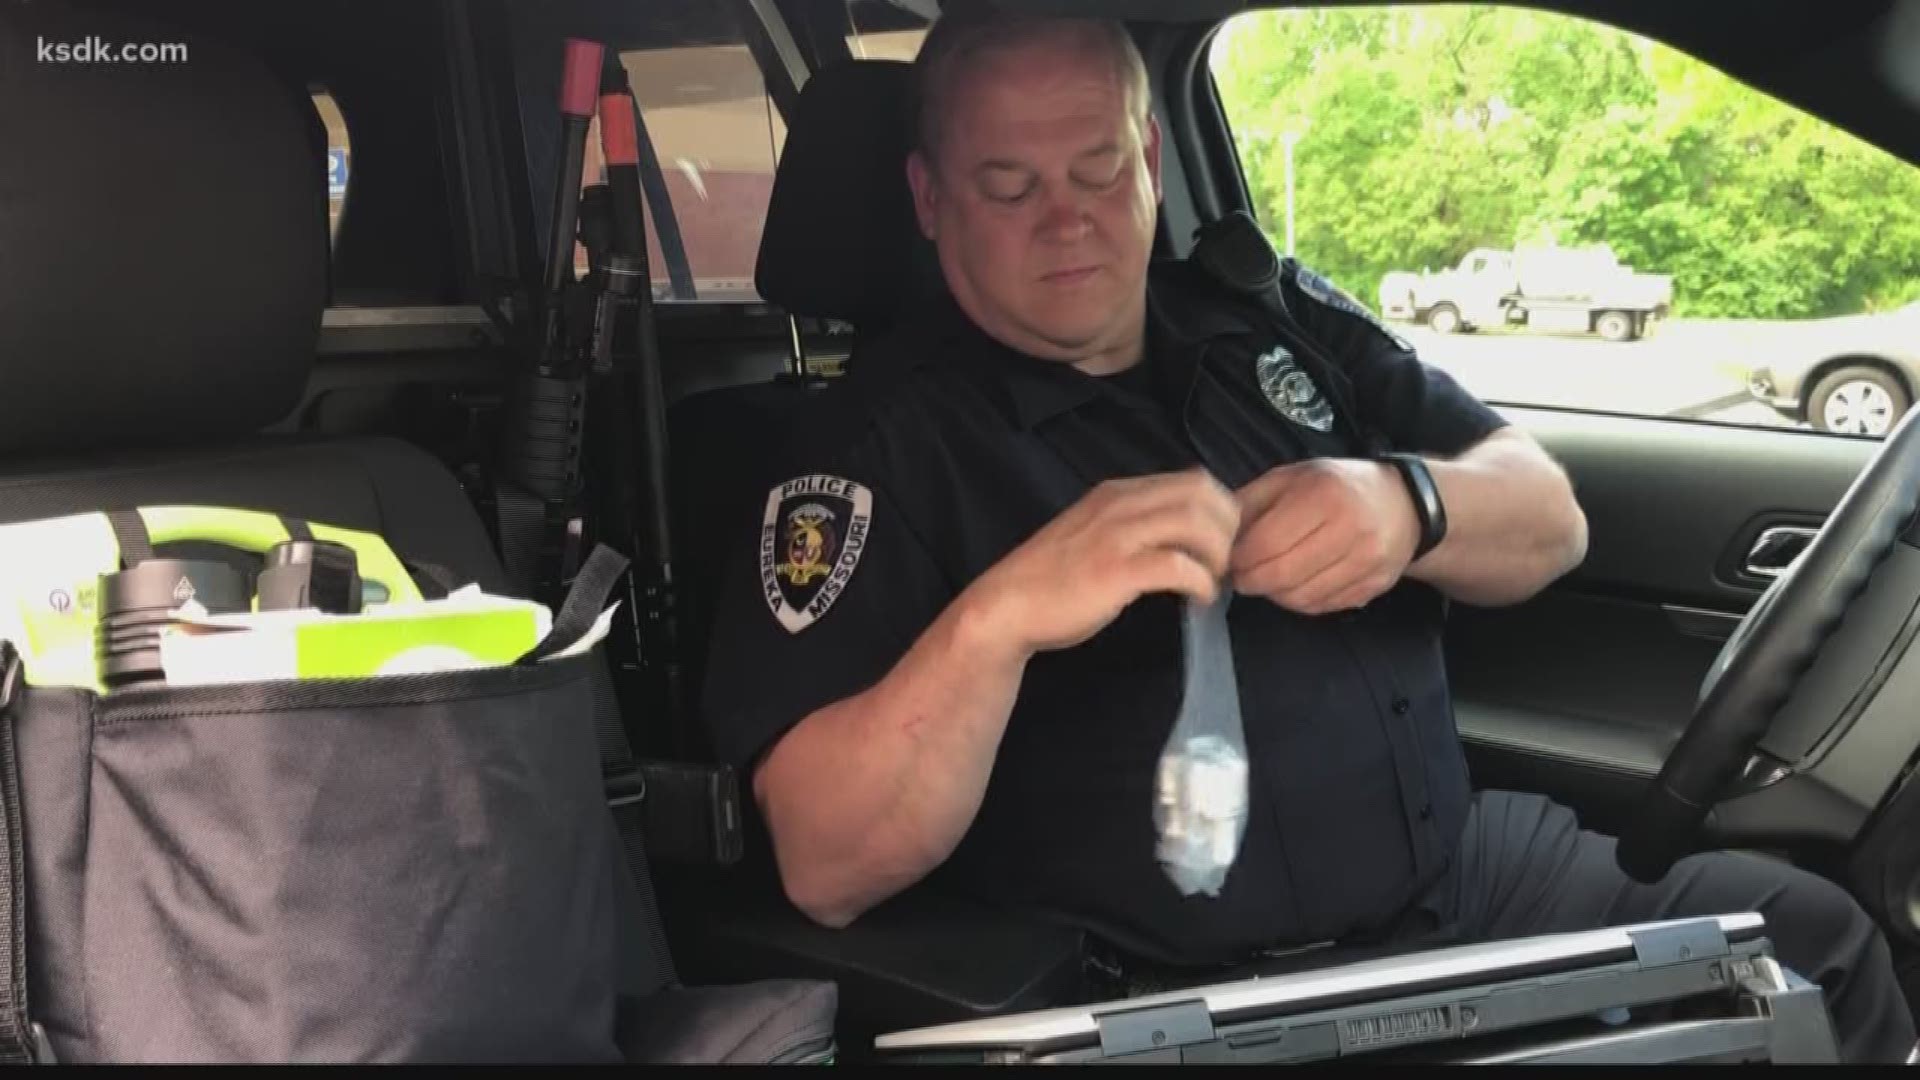 When Officer Dan Armbruster heads out for a shift, he's got two Narcan dispensers at the ready since opioid overdoses have become so commonplace. Police want to cut revival time by giving you the same tools.